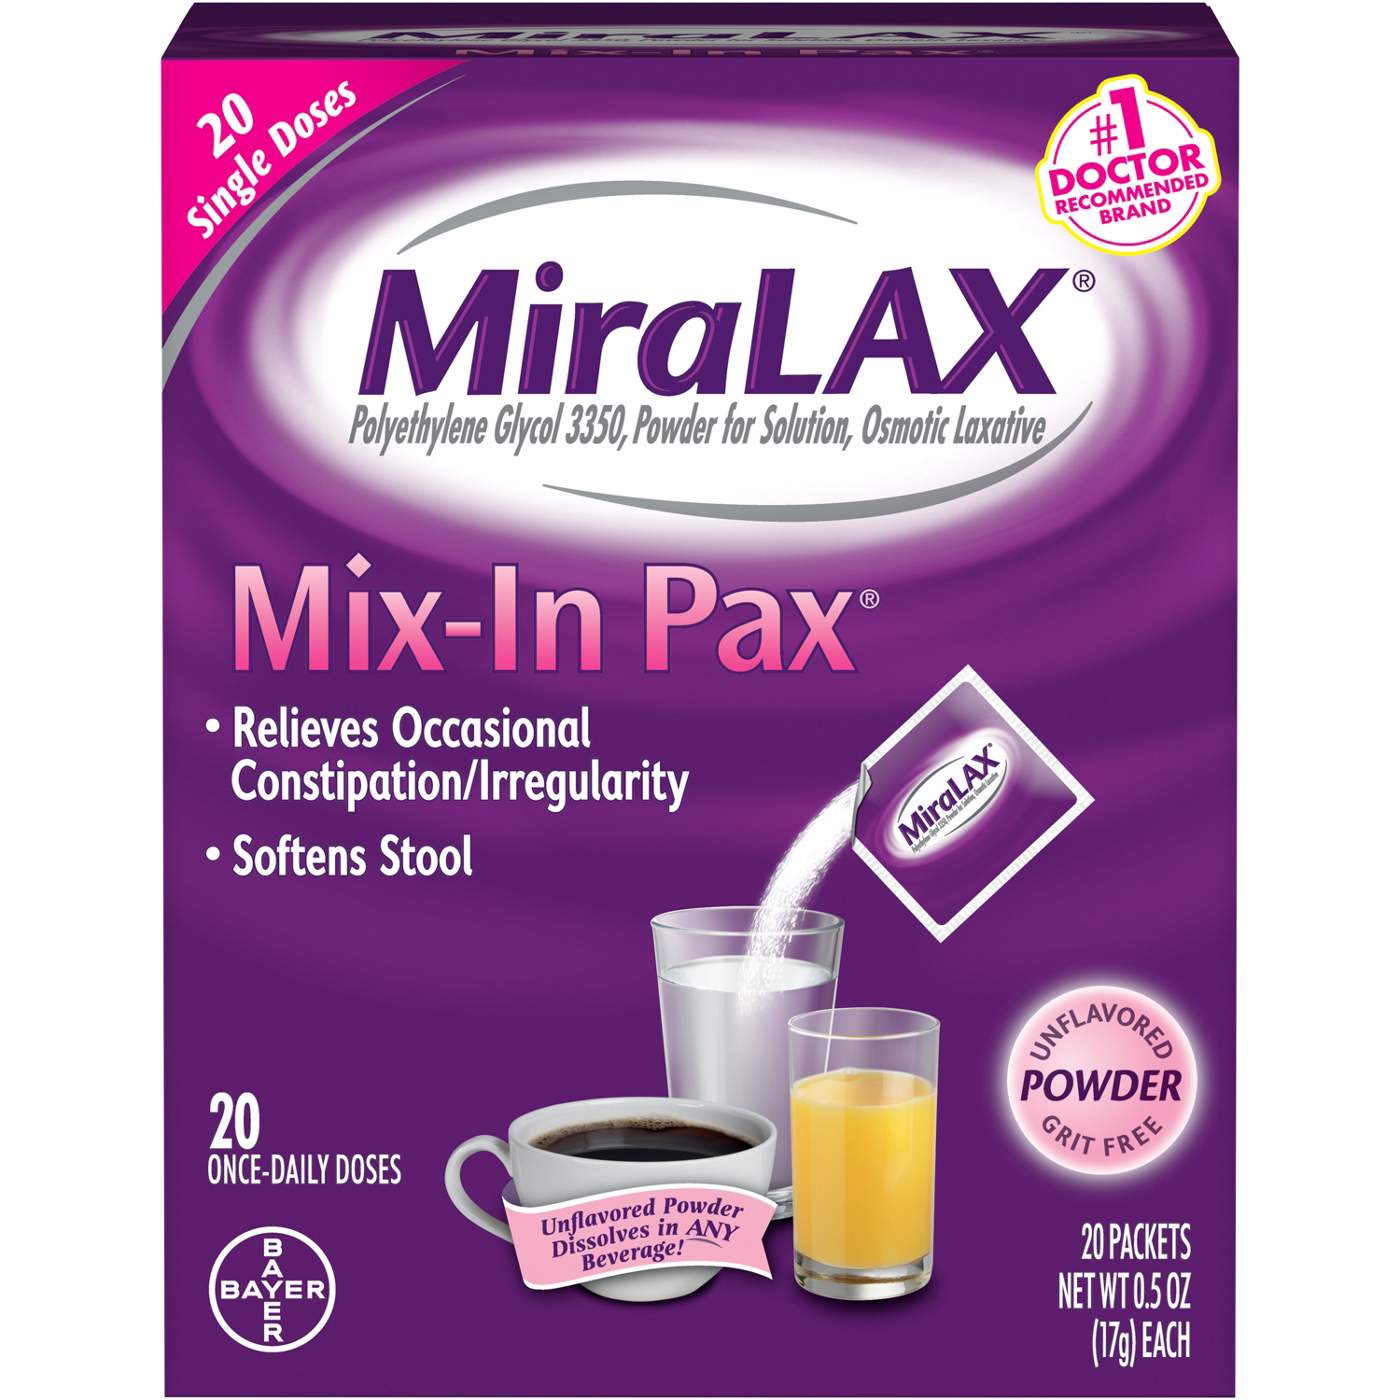 MiraLAX Mix-in Pax Unflavored Powder Packets; image 1 of 5